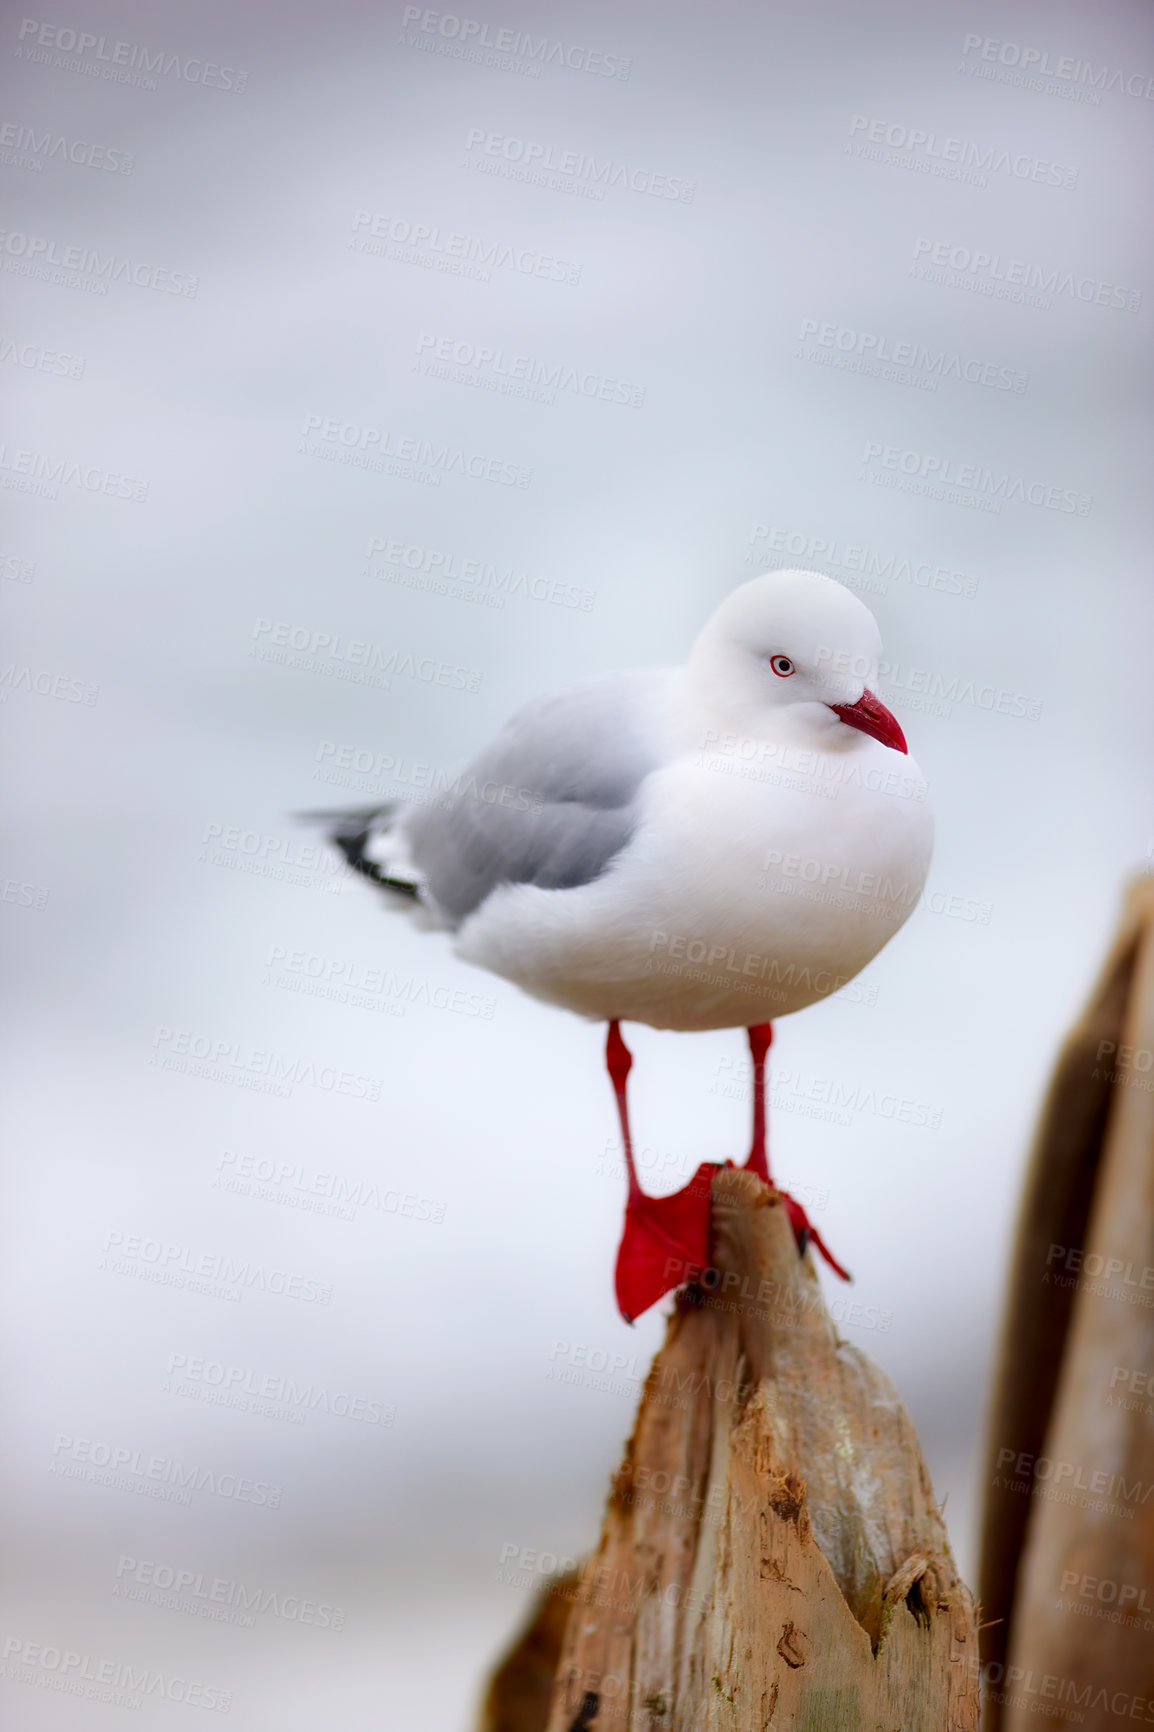 Buy stock photo One seagull sitting on a pier against a blurred grey background outside. Cute clean marine bird on a wooden beam at the beach with copy space. Wildlife in its nature habitat by the ocean in summer